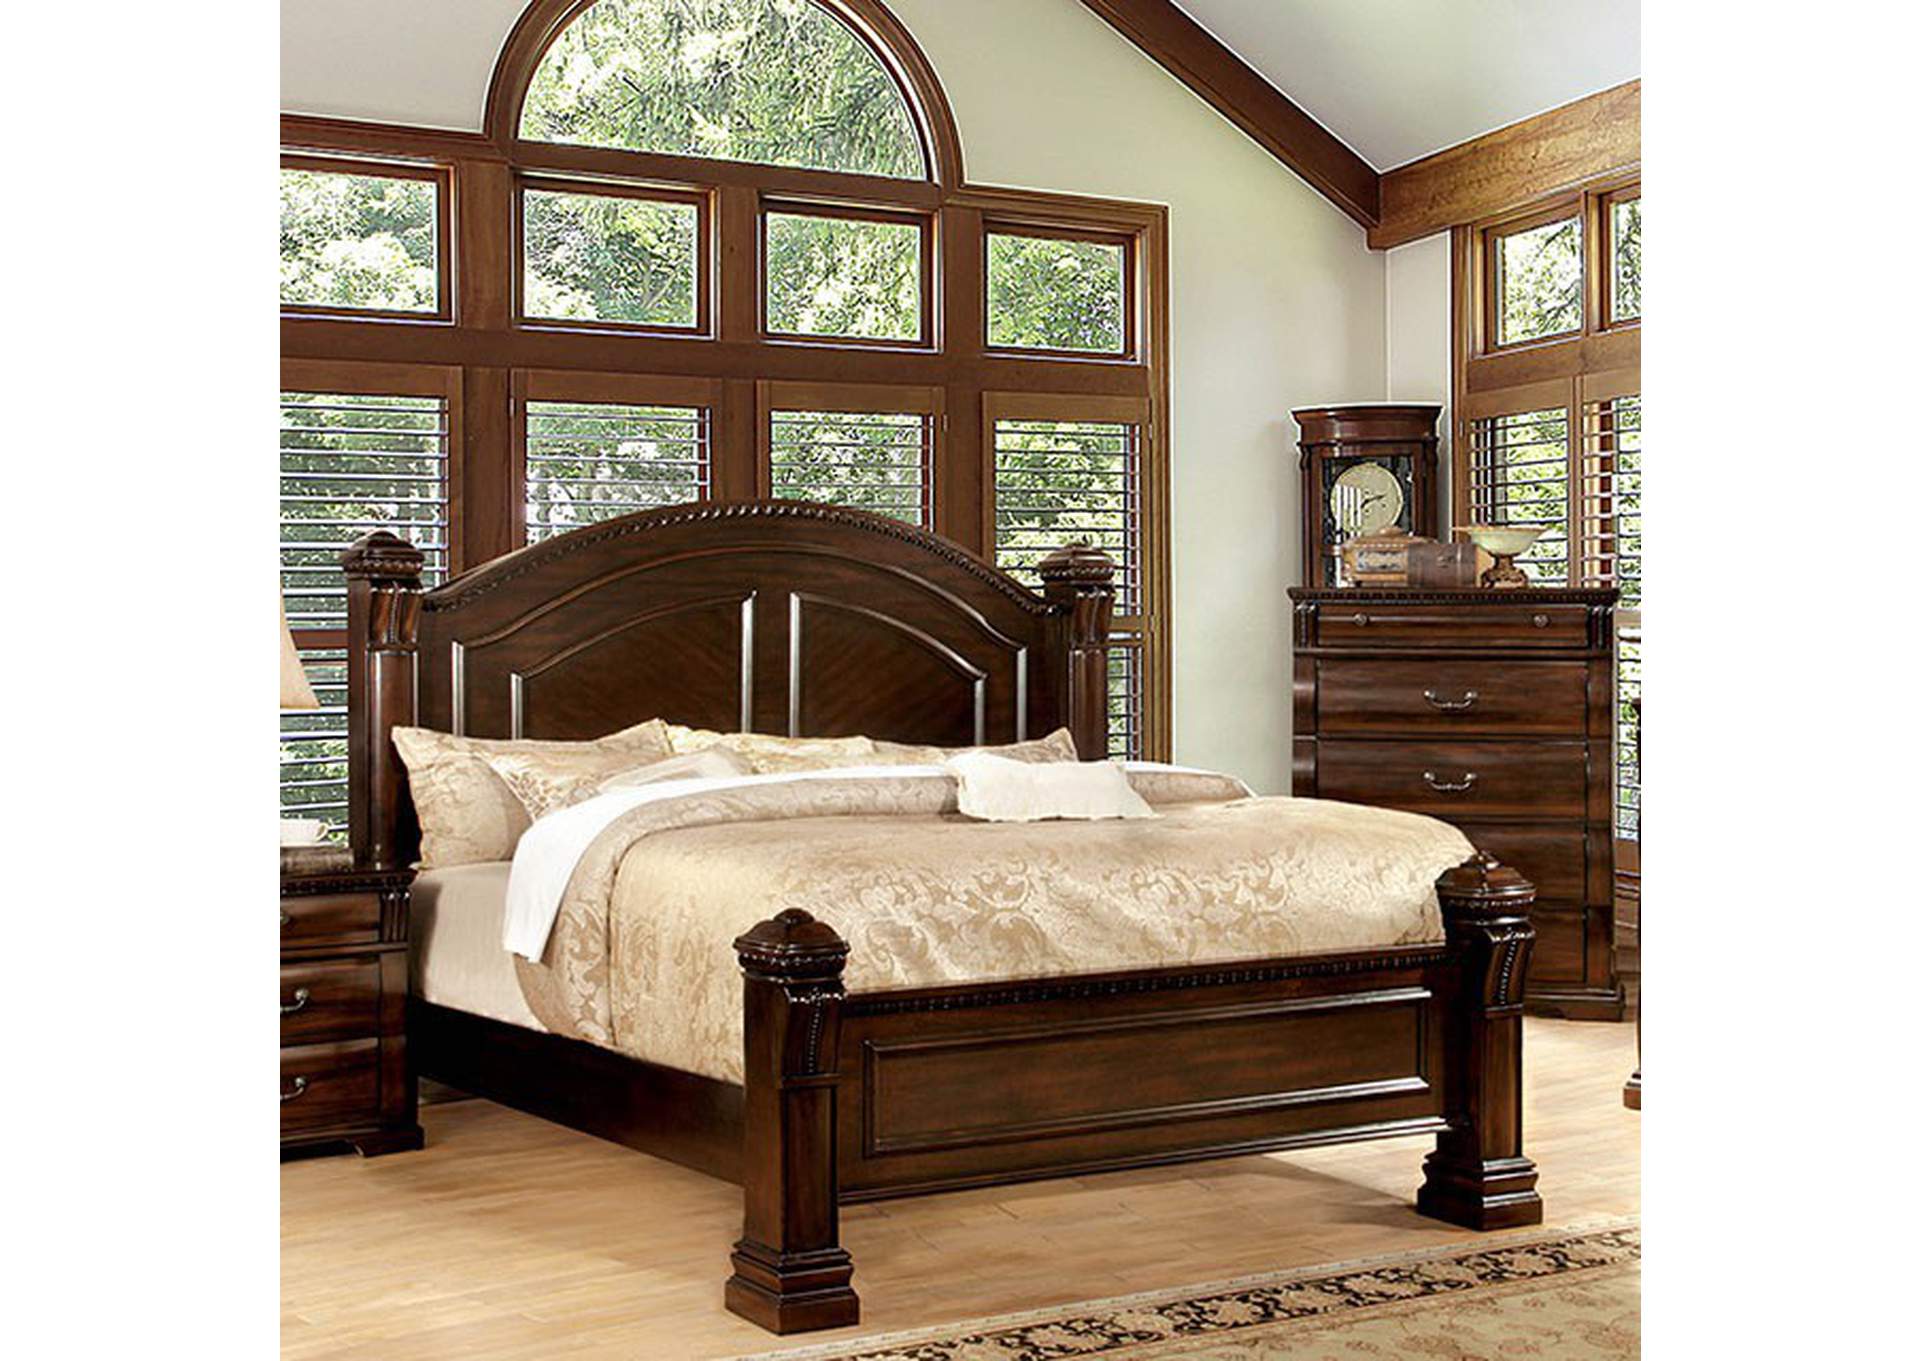 Burleigh Cherry Queen Bed,Furniture of America